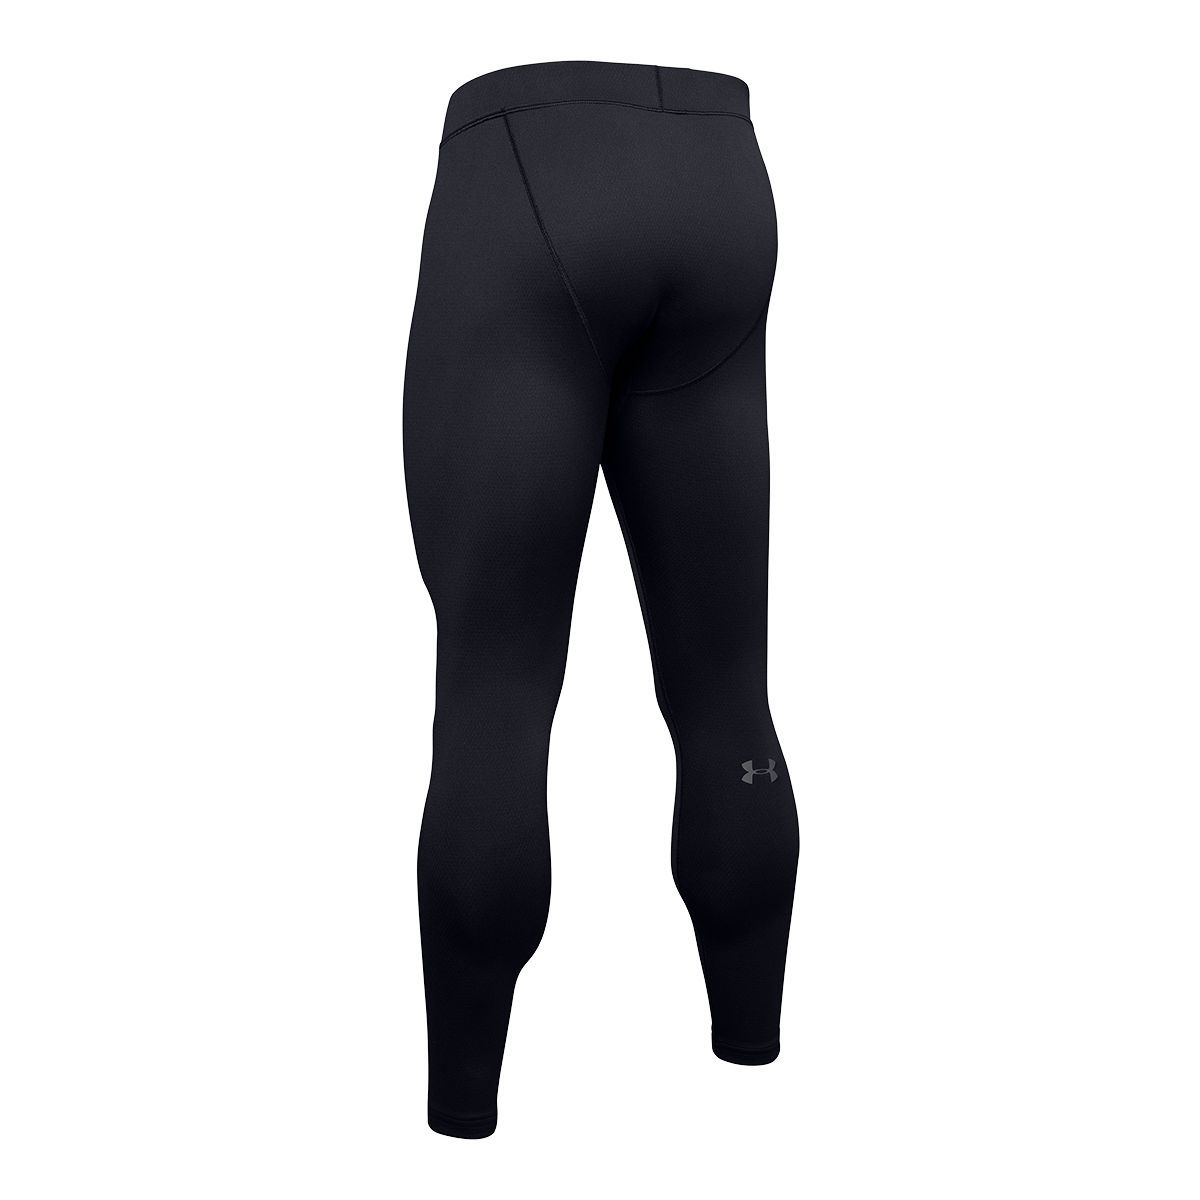 https://media-www.atmosphere.ca/product/div-03-softgoods/dpt-78-winter-clothing-accessories/sdpt-01-mens/332863748/ua-m-packaged-base-3-0-leggin-black-s--0e4427f1-7999-4ee5-a425-c9e4c0a7827d-jpgrendition.jpg?imdensity=1&imwidth=1244&impolicy=mZoom